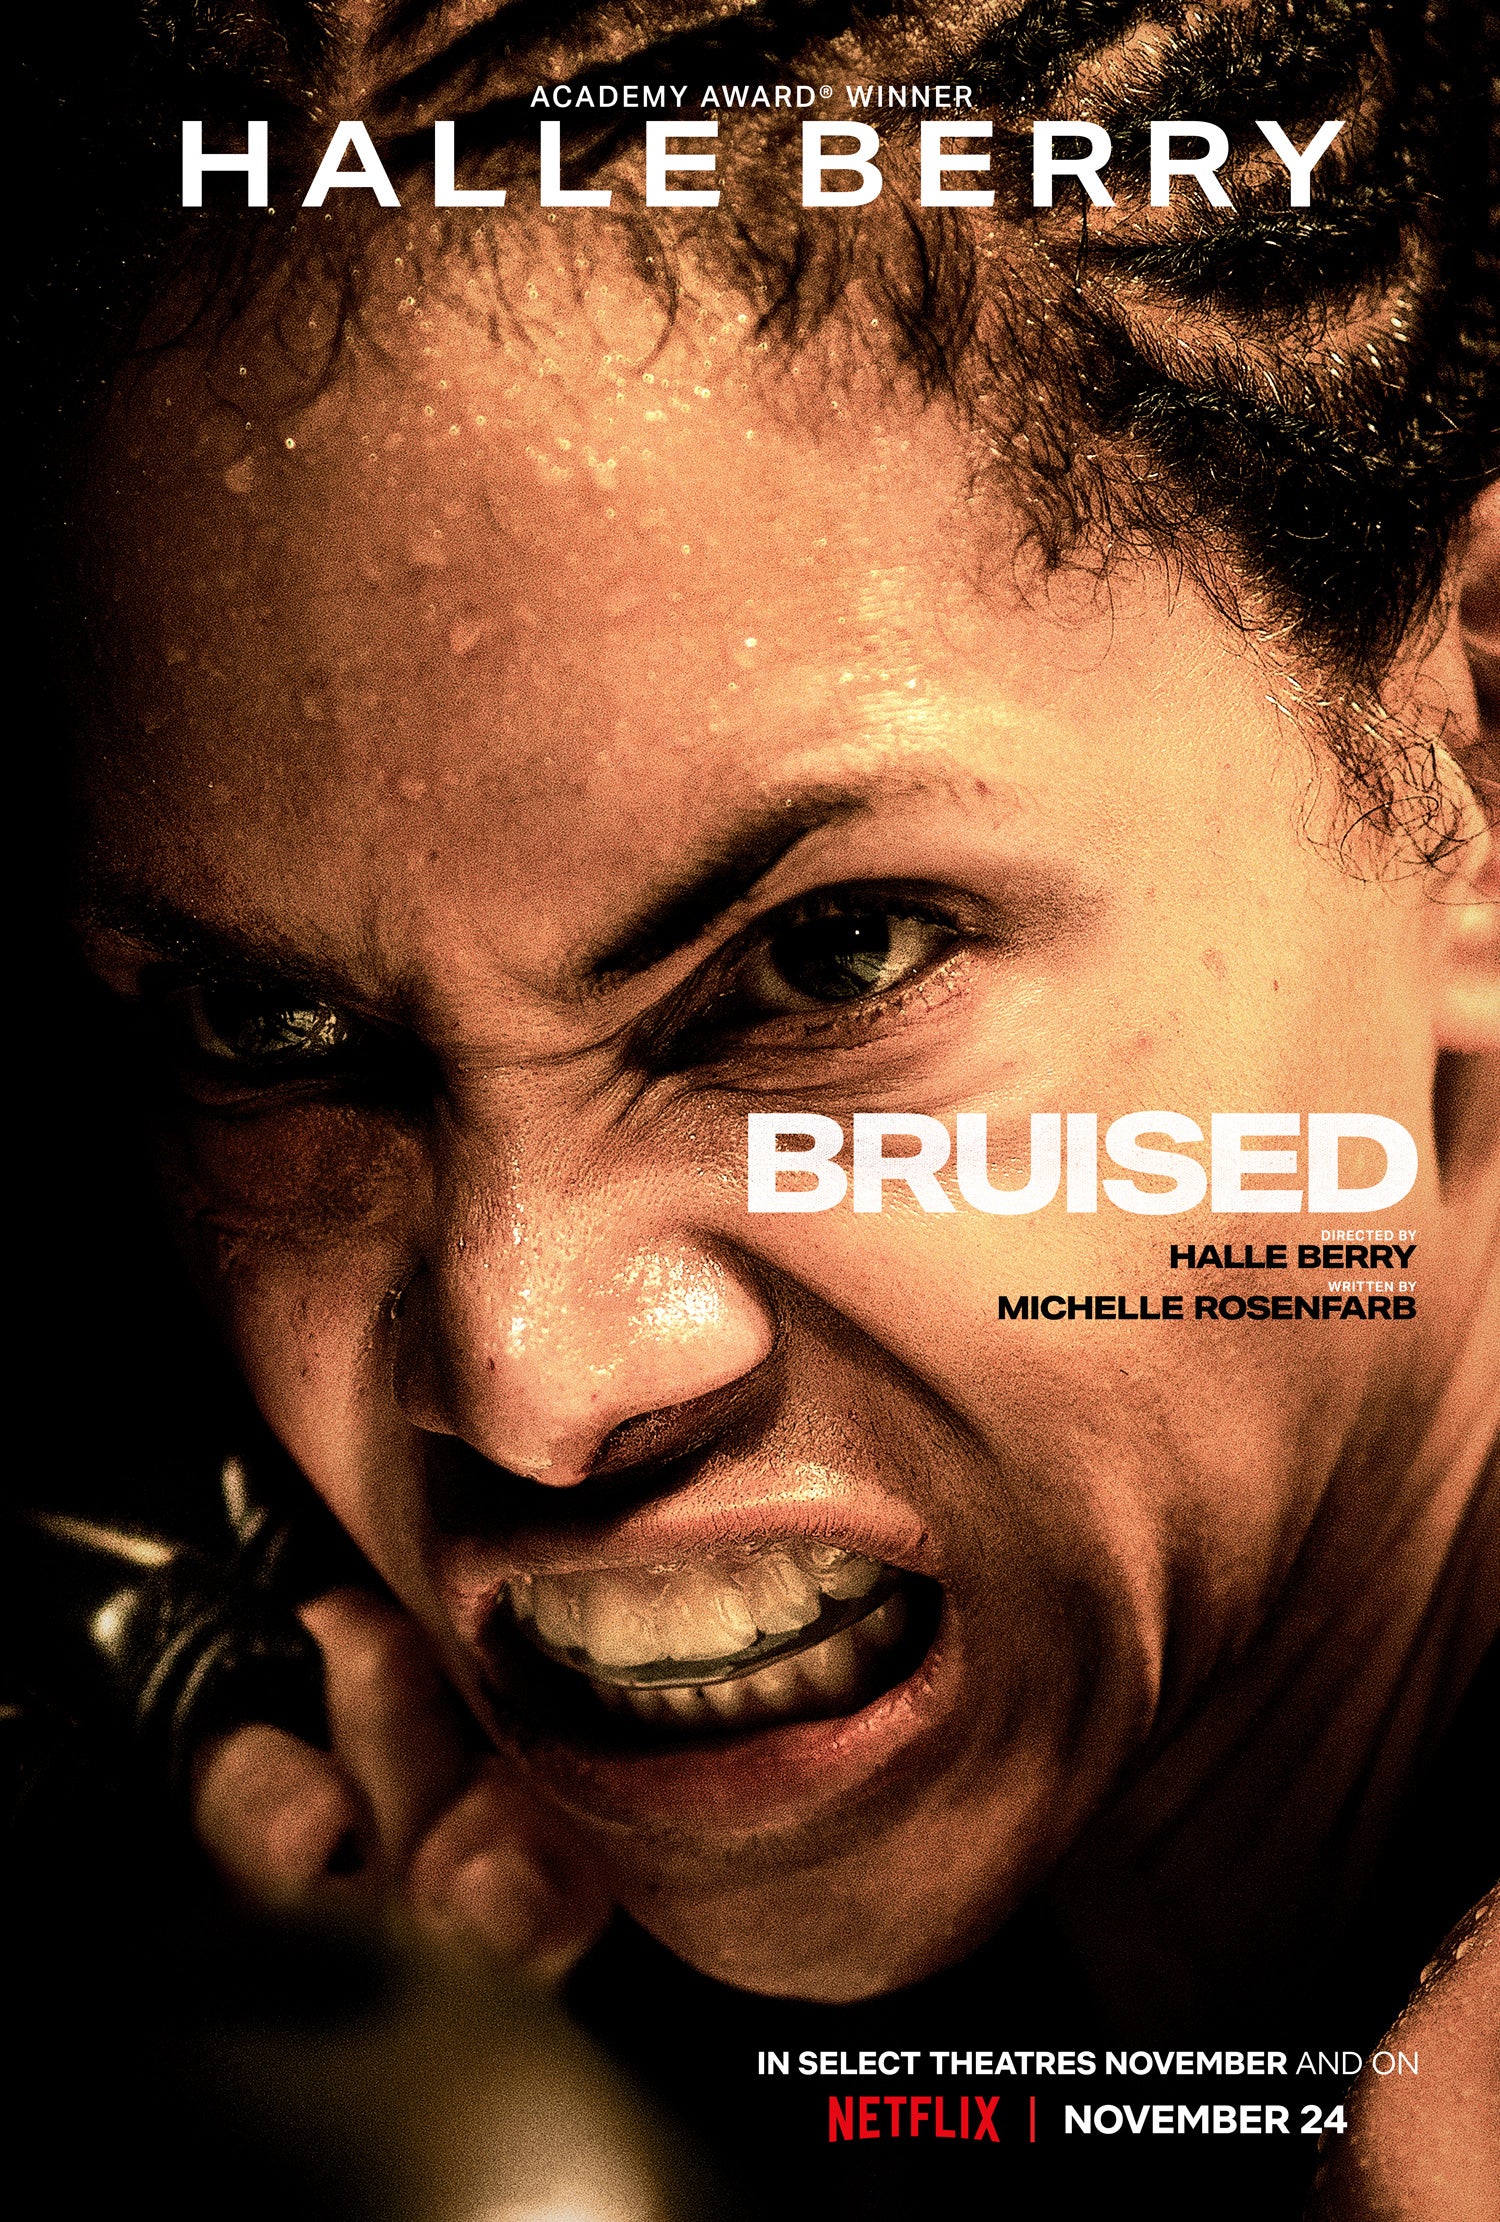 First Look: Halle Berry Makes Directorial Debut And Stars In ‘Bruised’